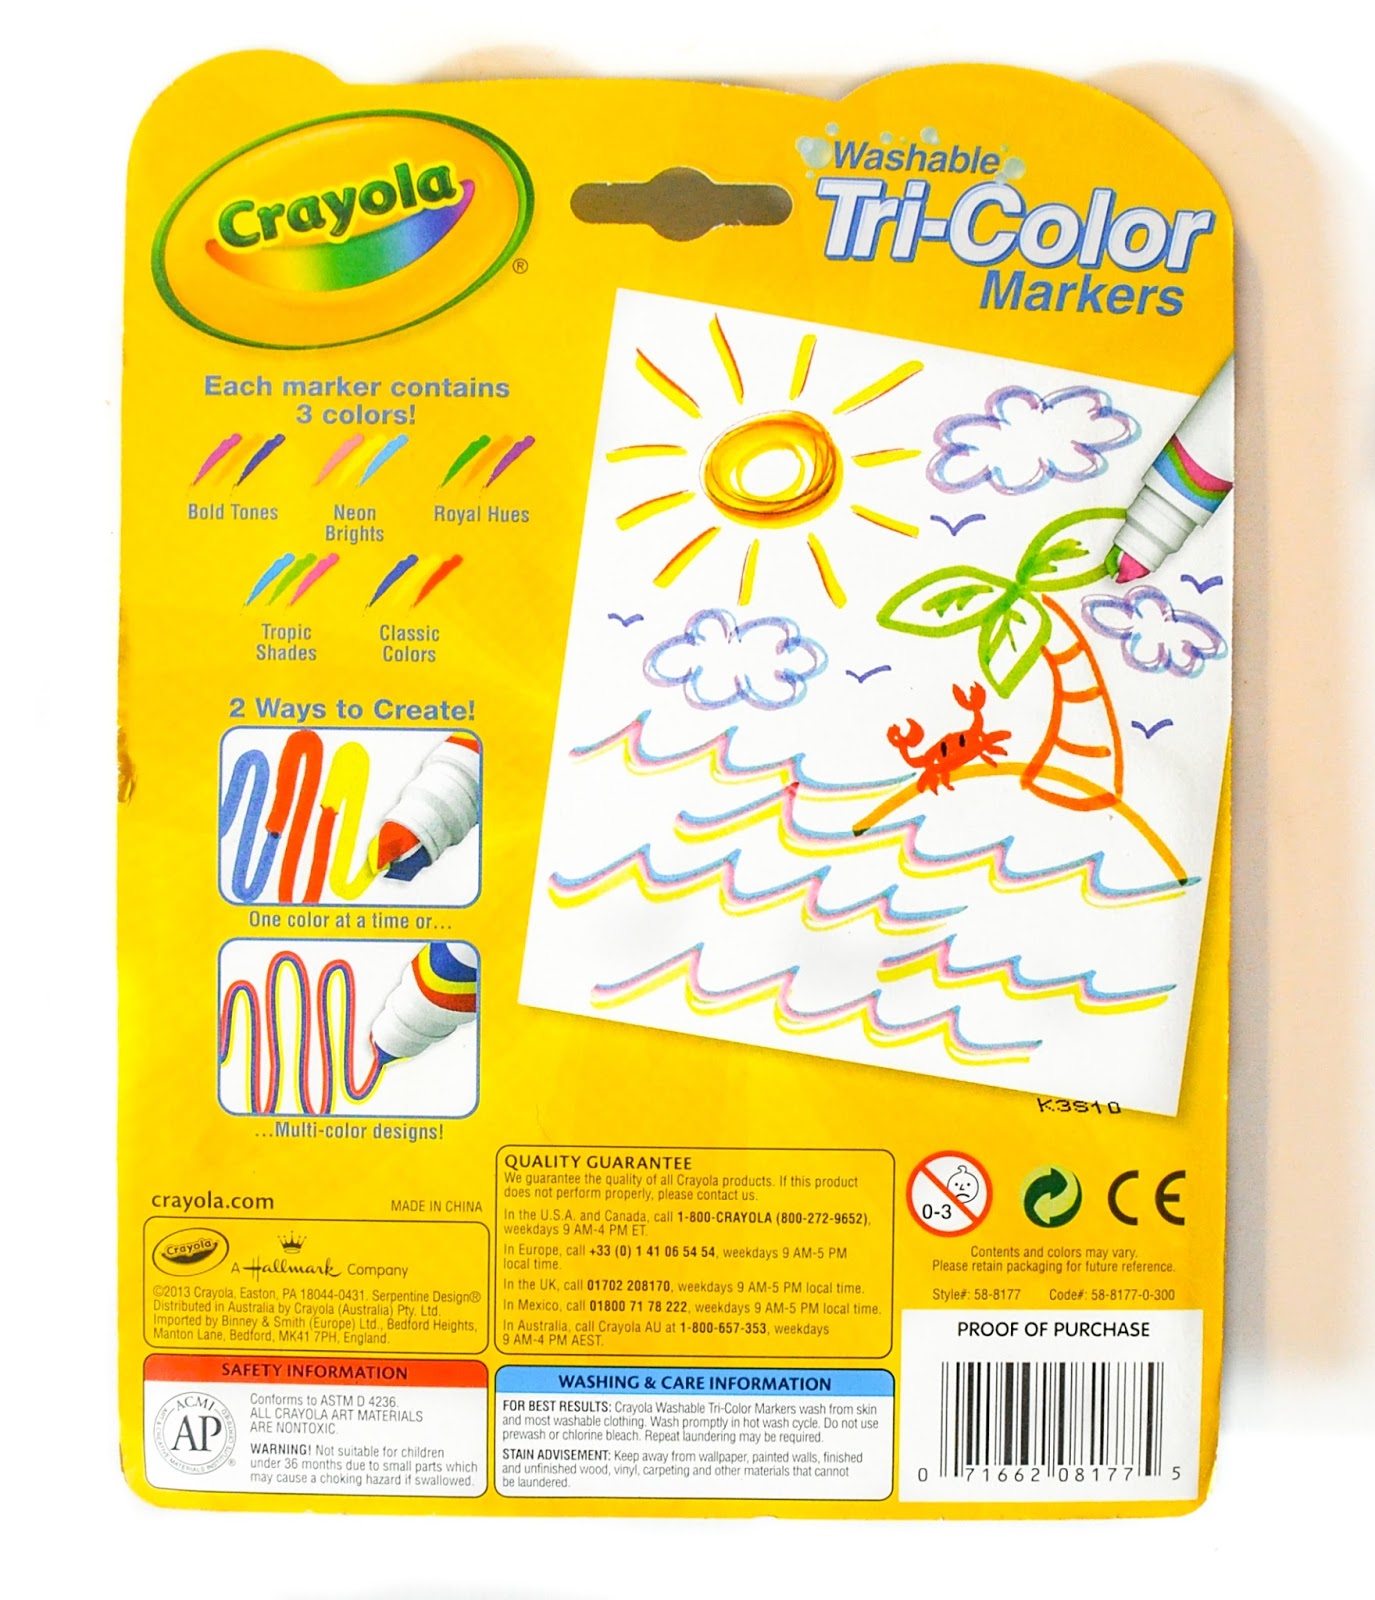 Crayola Tri-Color Markers: What's In the Box